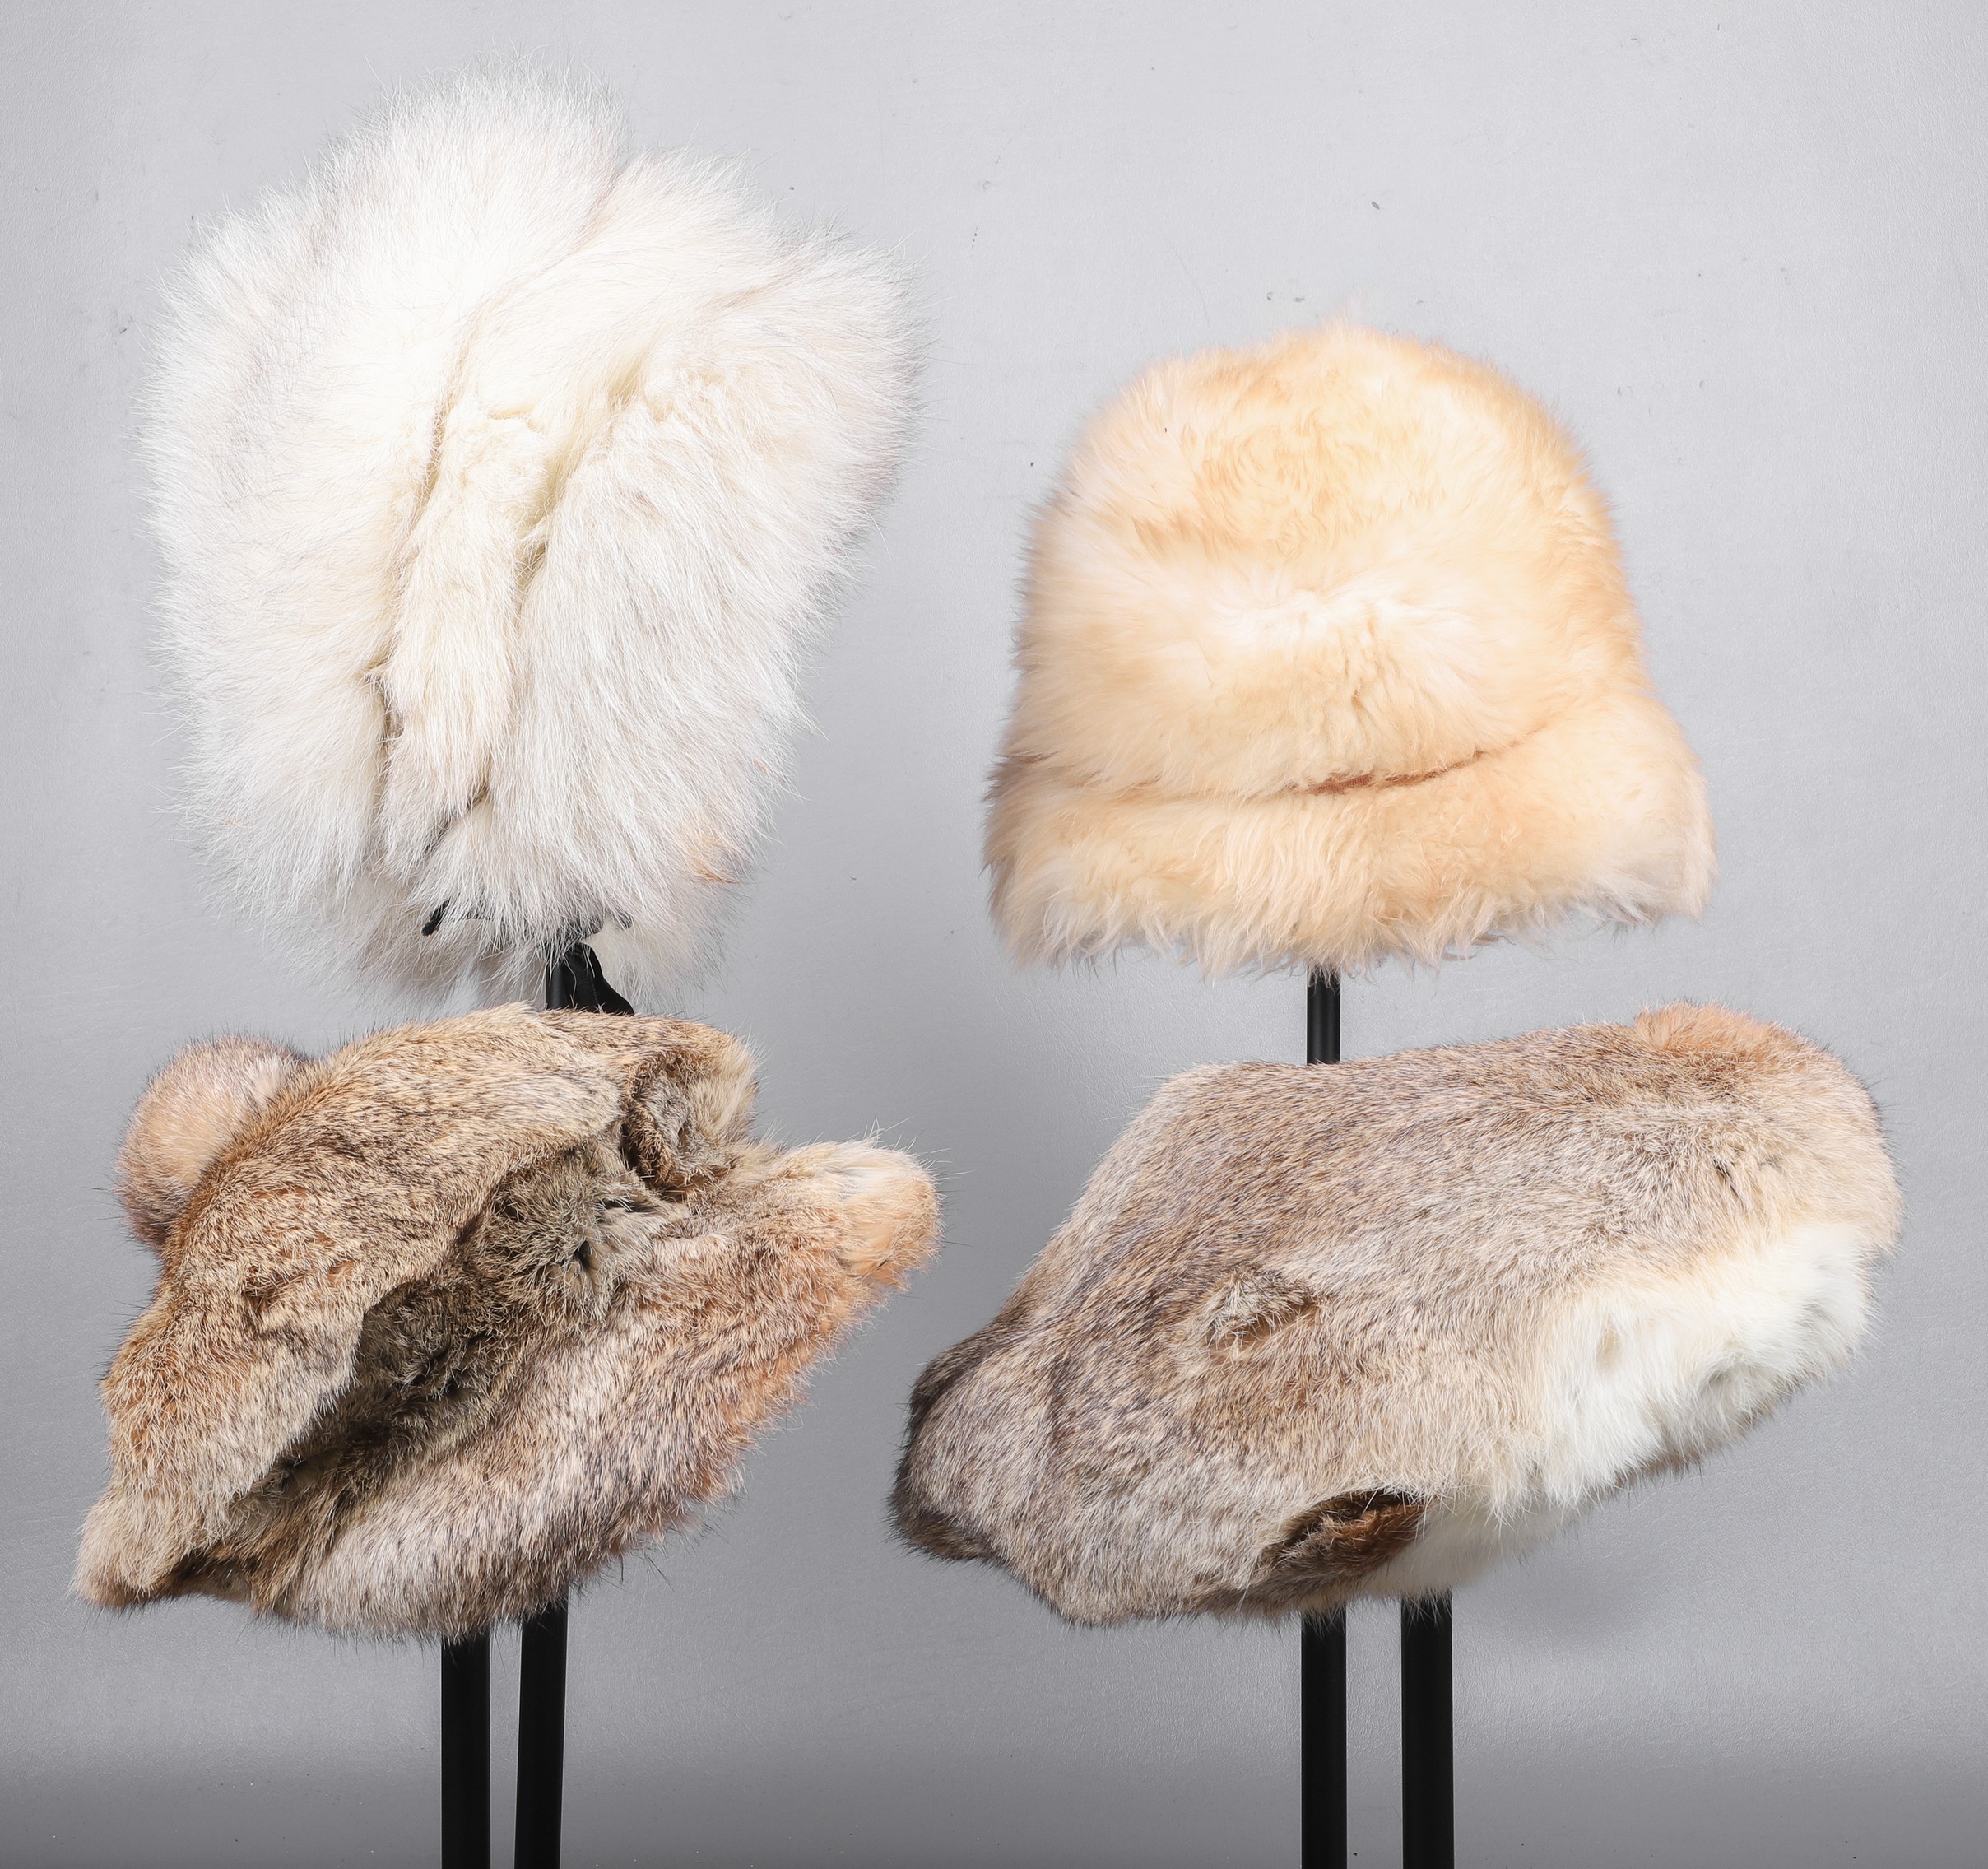  4 Vintage fur hats to include 27a6a6